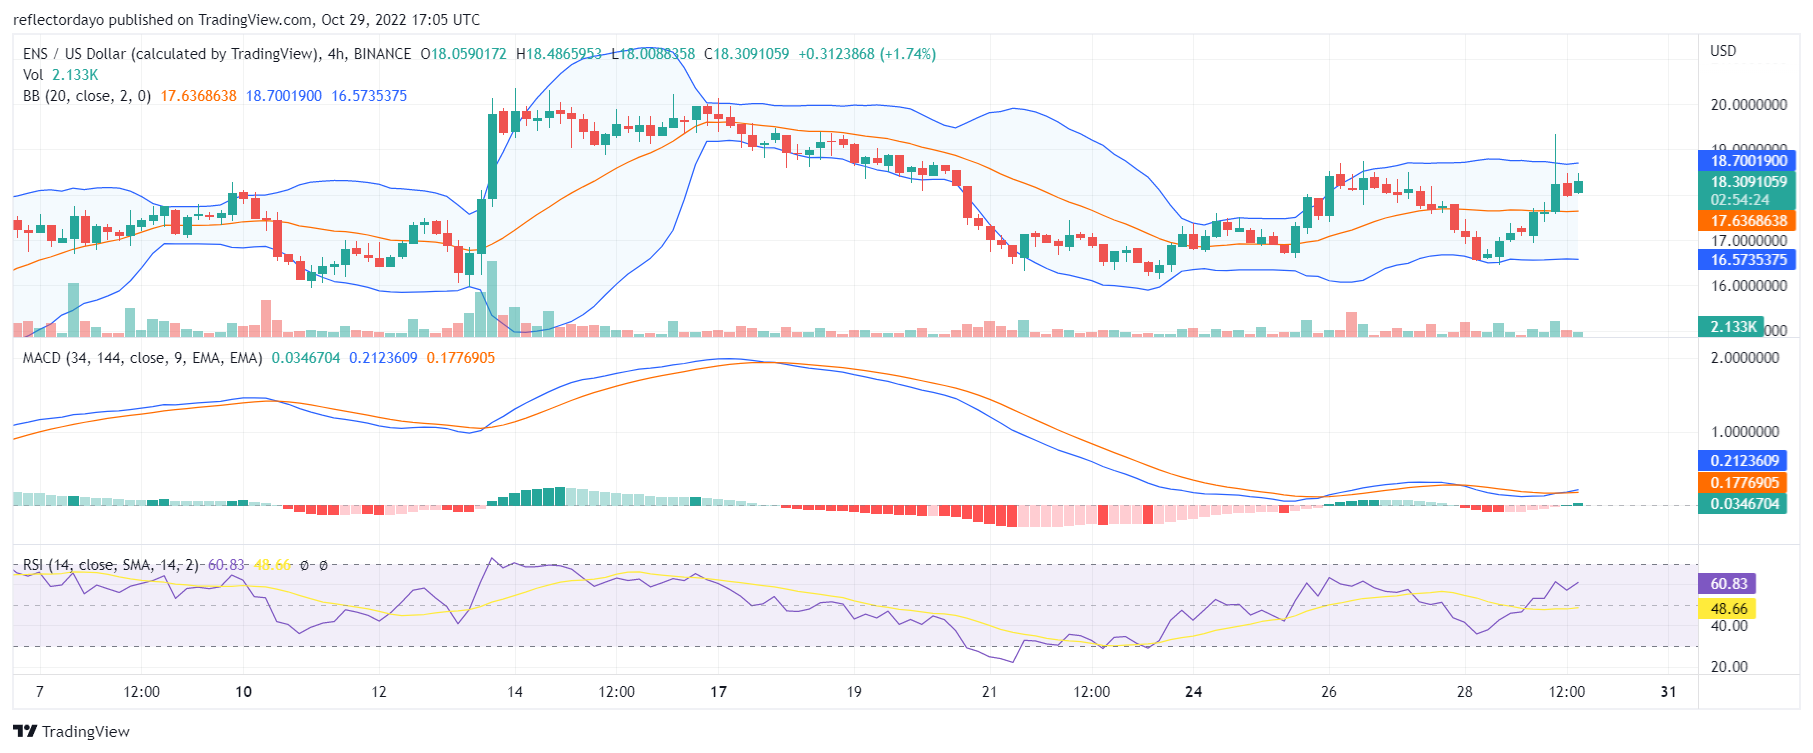 Ethereum Name Service Price Prediction for Today, October 29: ENS/USD Is Targeting $20.000 Price Level